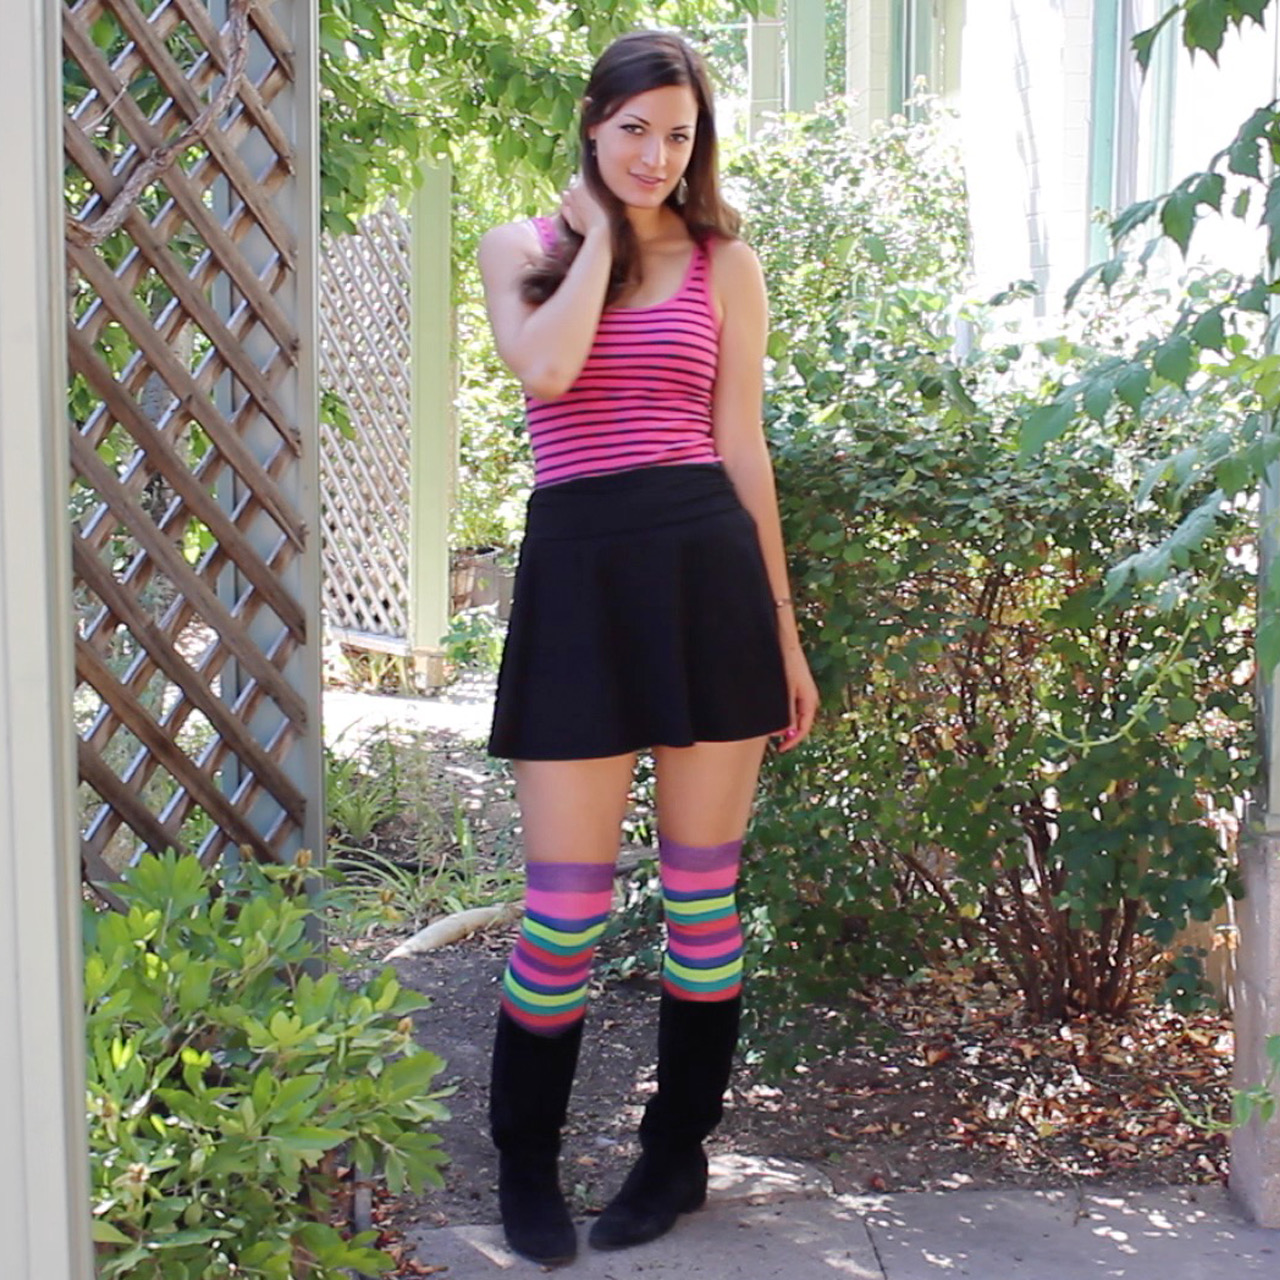 A woman standing in a garden pathway wearing a pink and black striped tank top, black skirt, striped long socks in shades of purple, blue, and green, and black mid-calf boots.